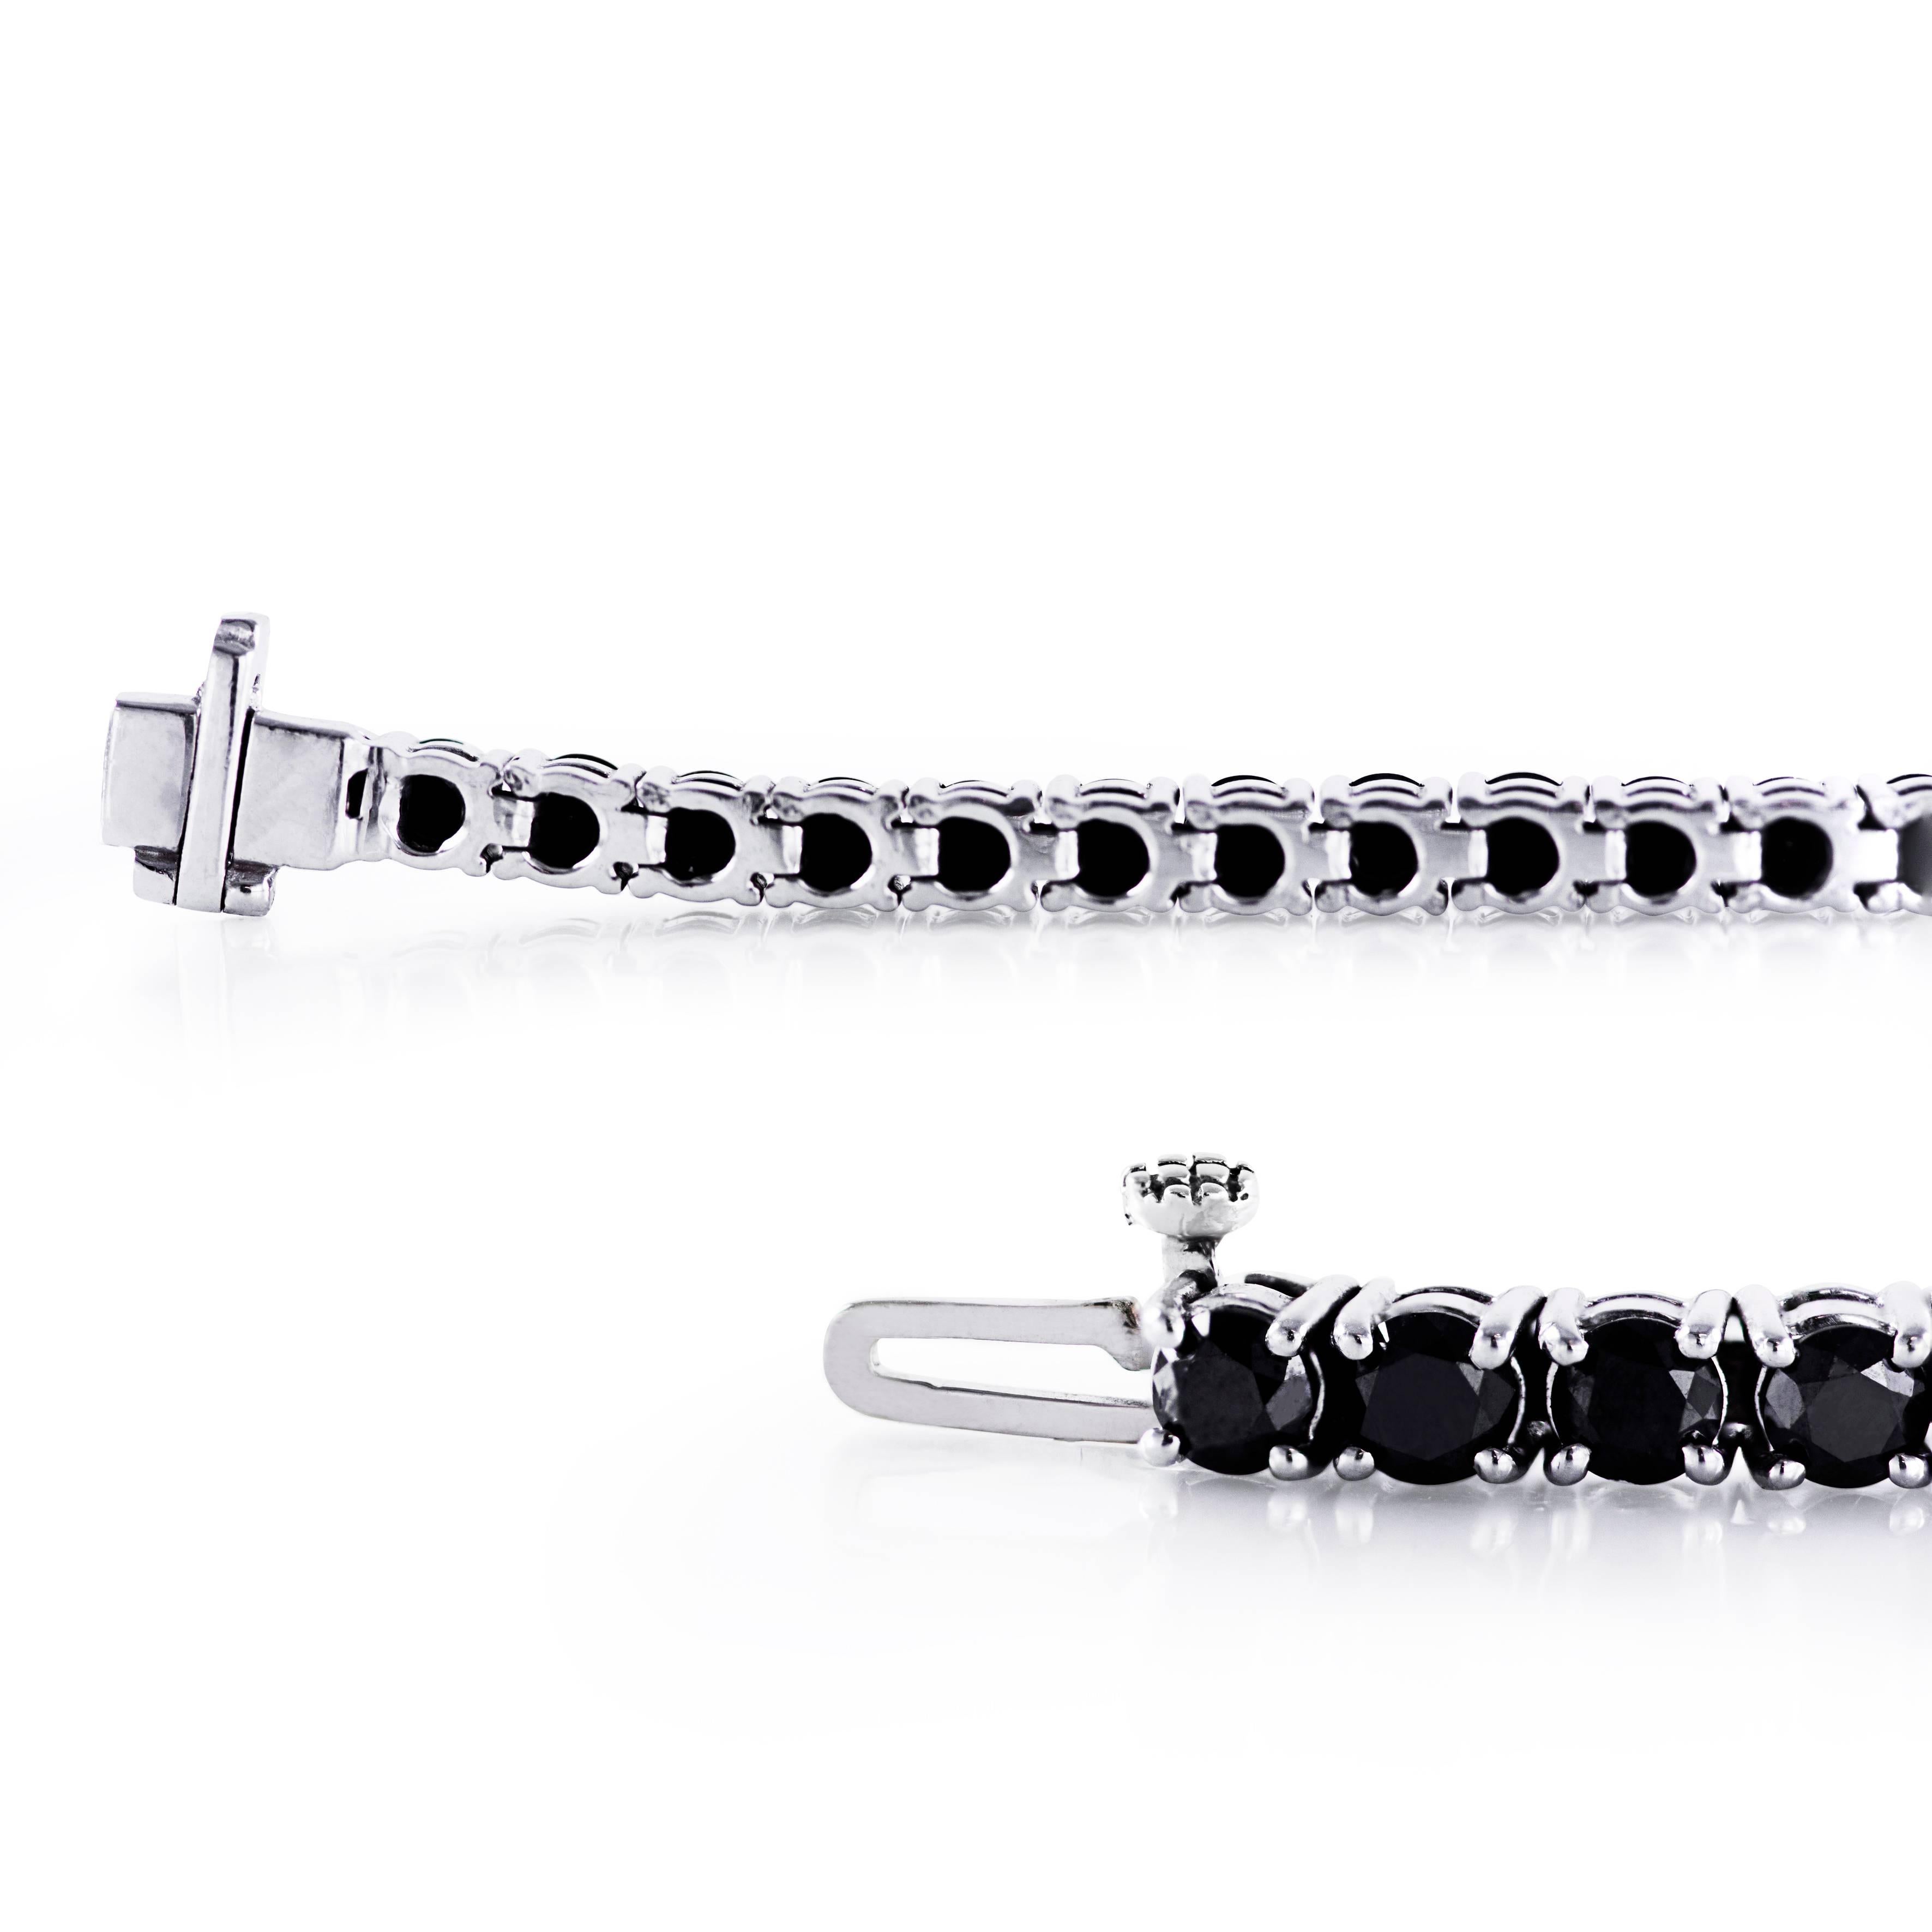 This tennis bracelet features 50 round brilliant black diamonds weighing 7.97 carats total set in a 4 prong setting. Made in 14k white gold. Size is 7 inches.

Style available in different price ranges. Prices are based on your selection of the 4C’s